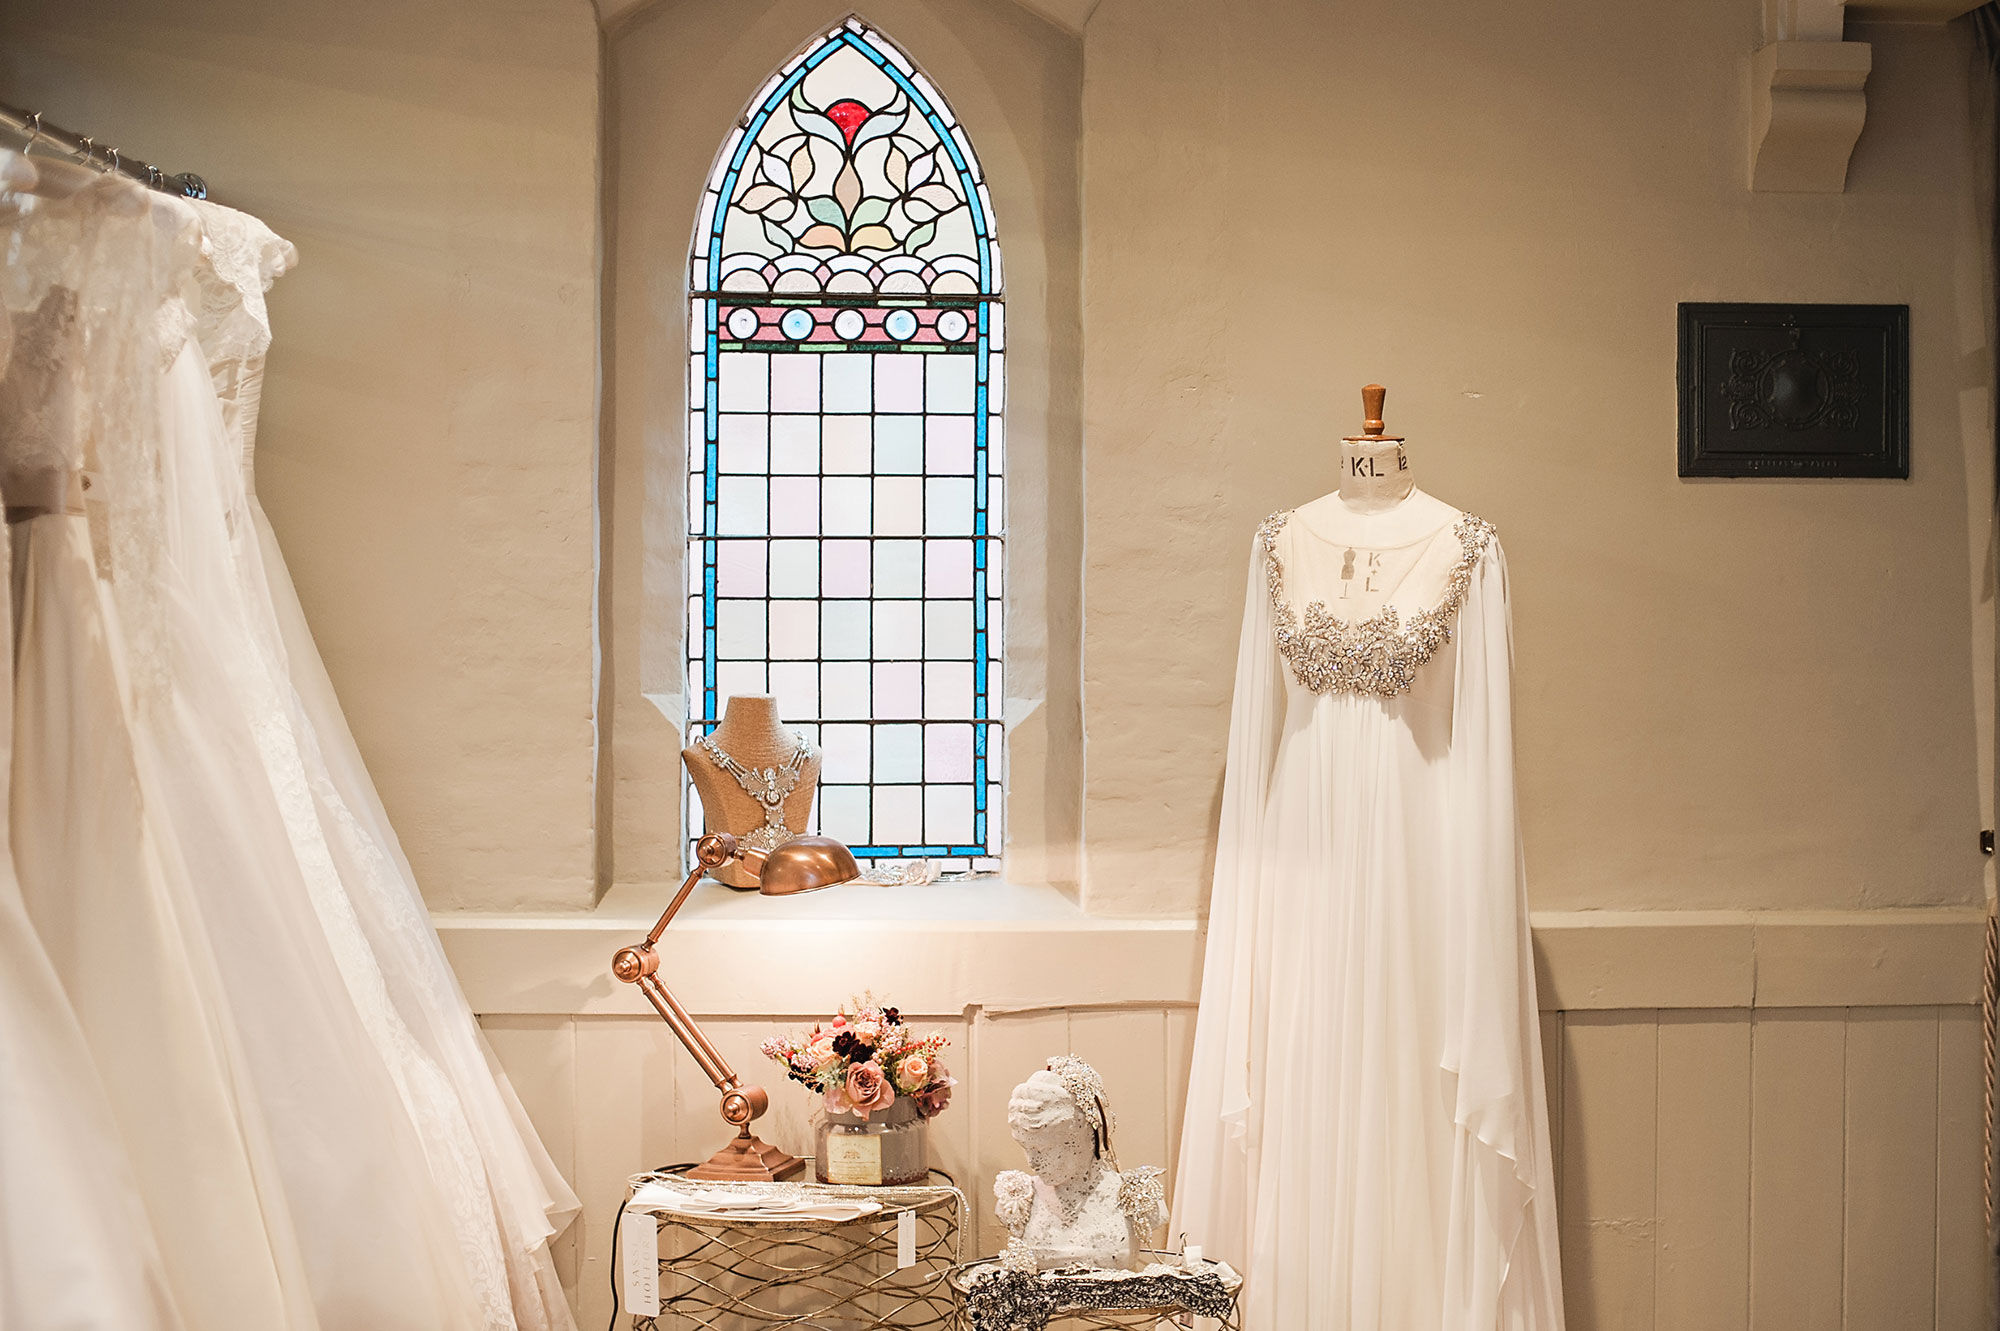 Miss Bush Bridal boutique is located in a converted chapel